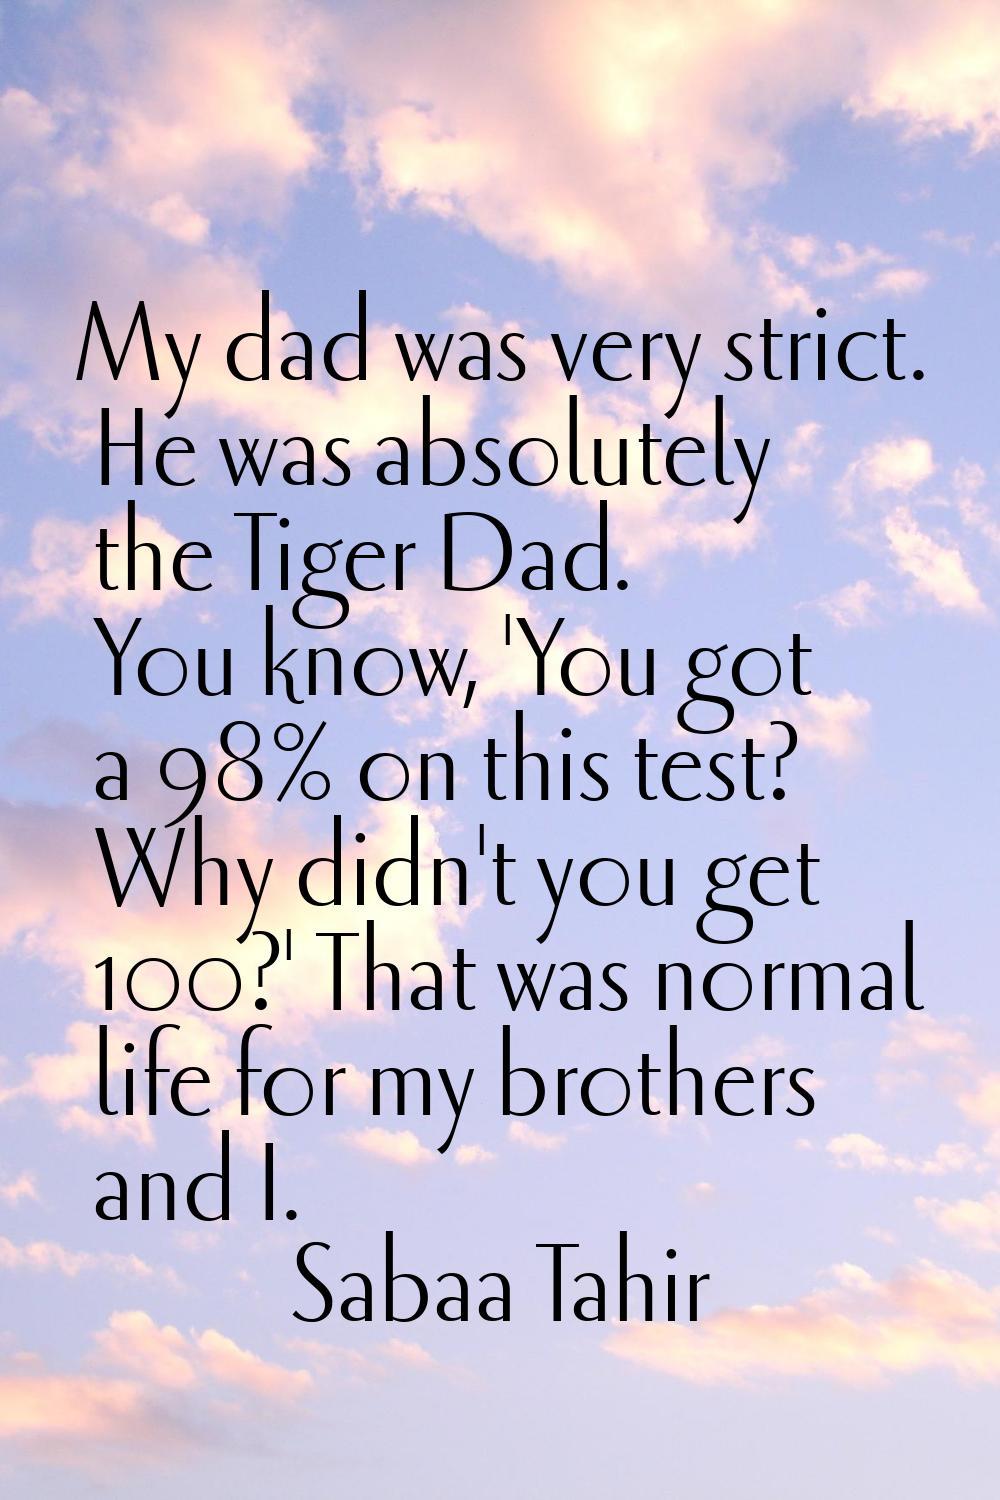 My dad was very strict. He was absolutely the Tiger Dad. You know, 'You got a 98% on this test? Why